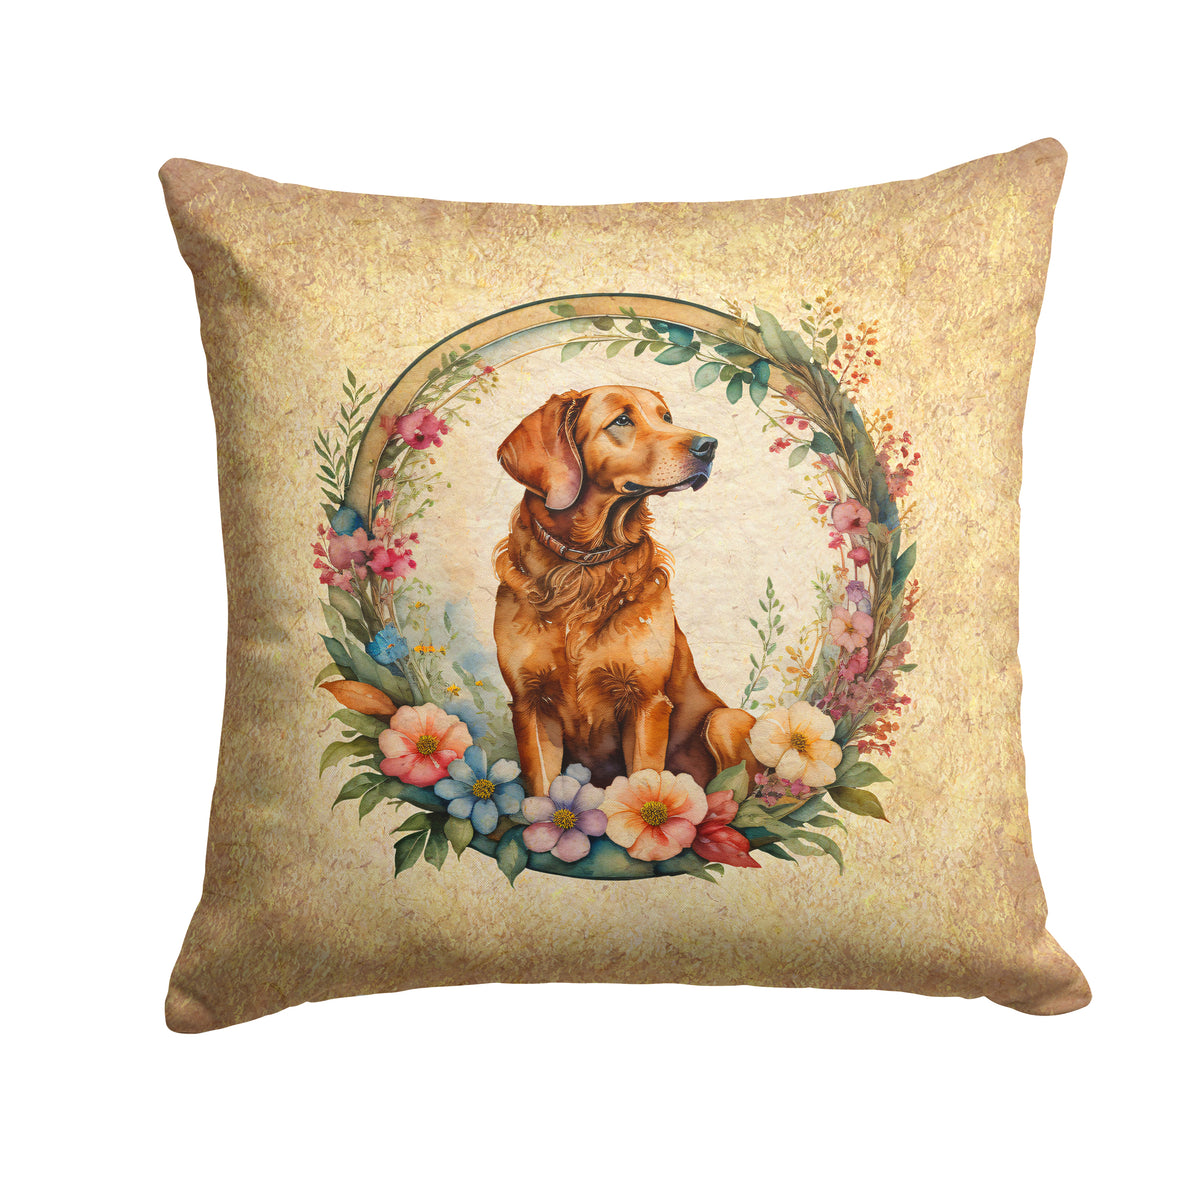 Buy this Chesapeake Bay Retriever and Flowers Fabric Decorative Pillow